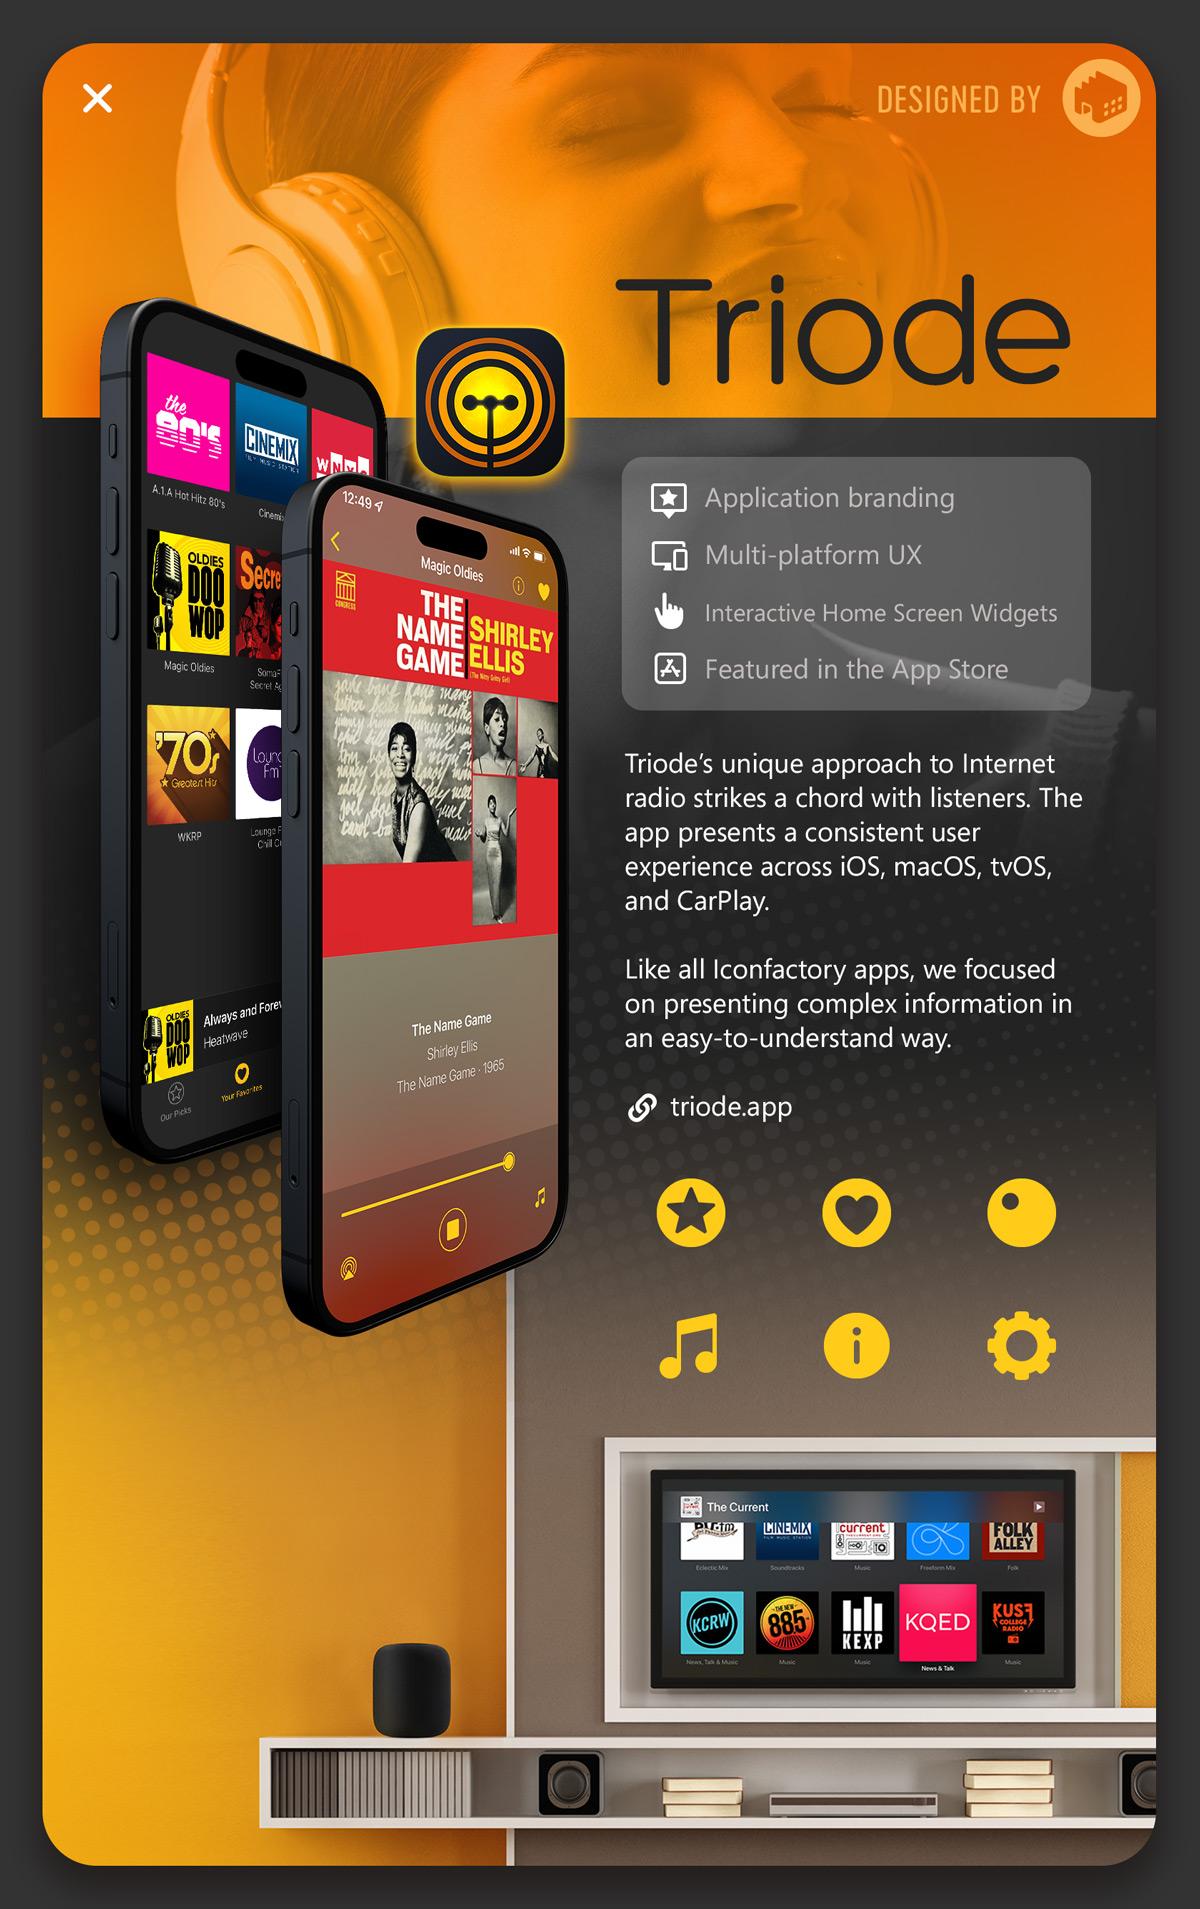 Screenshot of a software promotional graphic for The Iconfactory's flagship app - Triode. The design showcases 2 iPhones running Triode framed against a background of oranges and black.